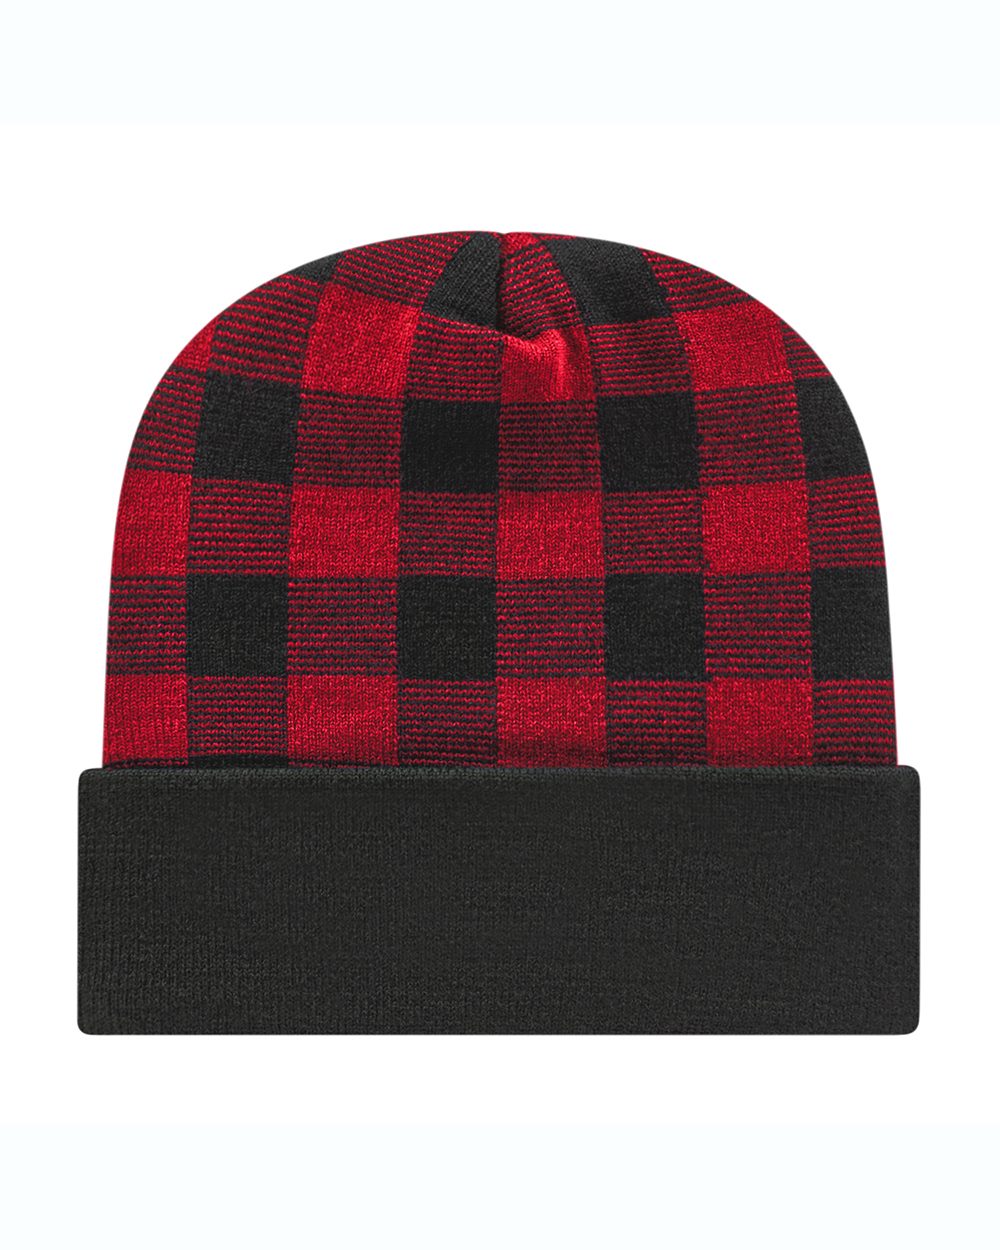 Plaid Stocking Hat with Leather Patch